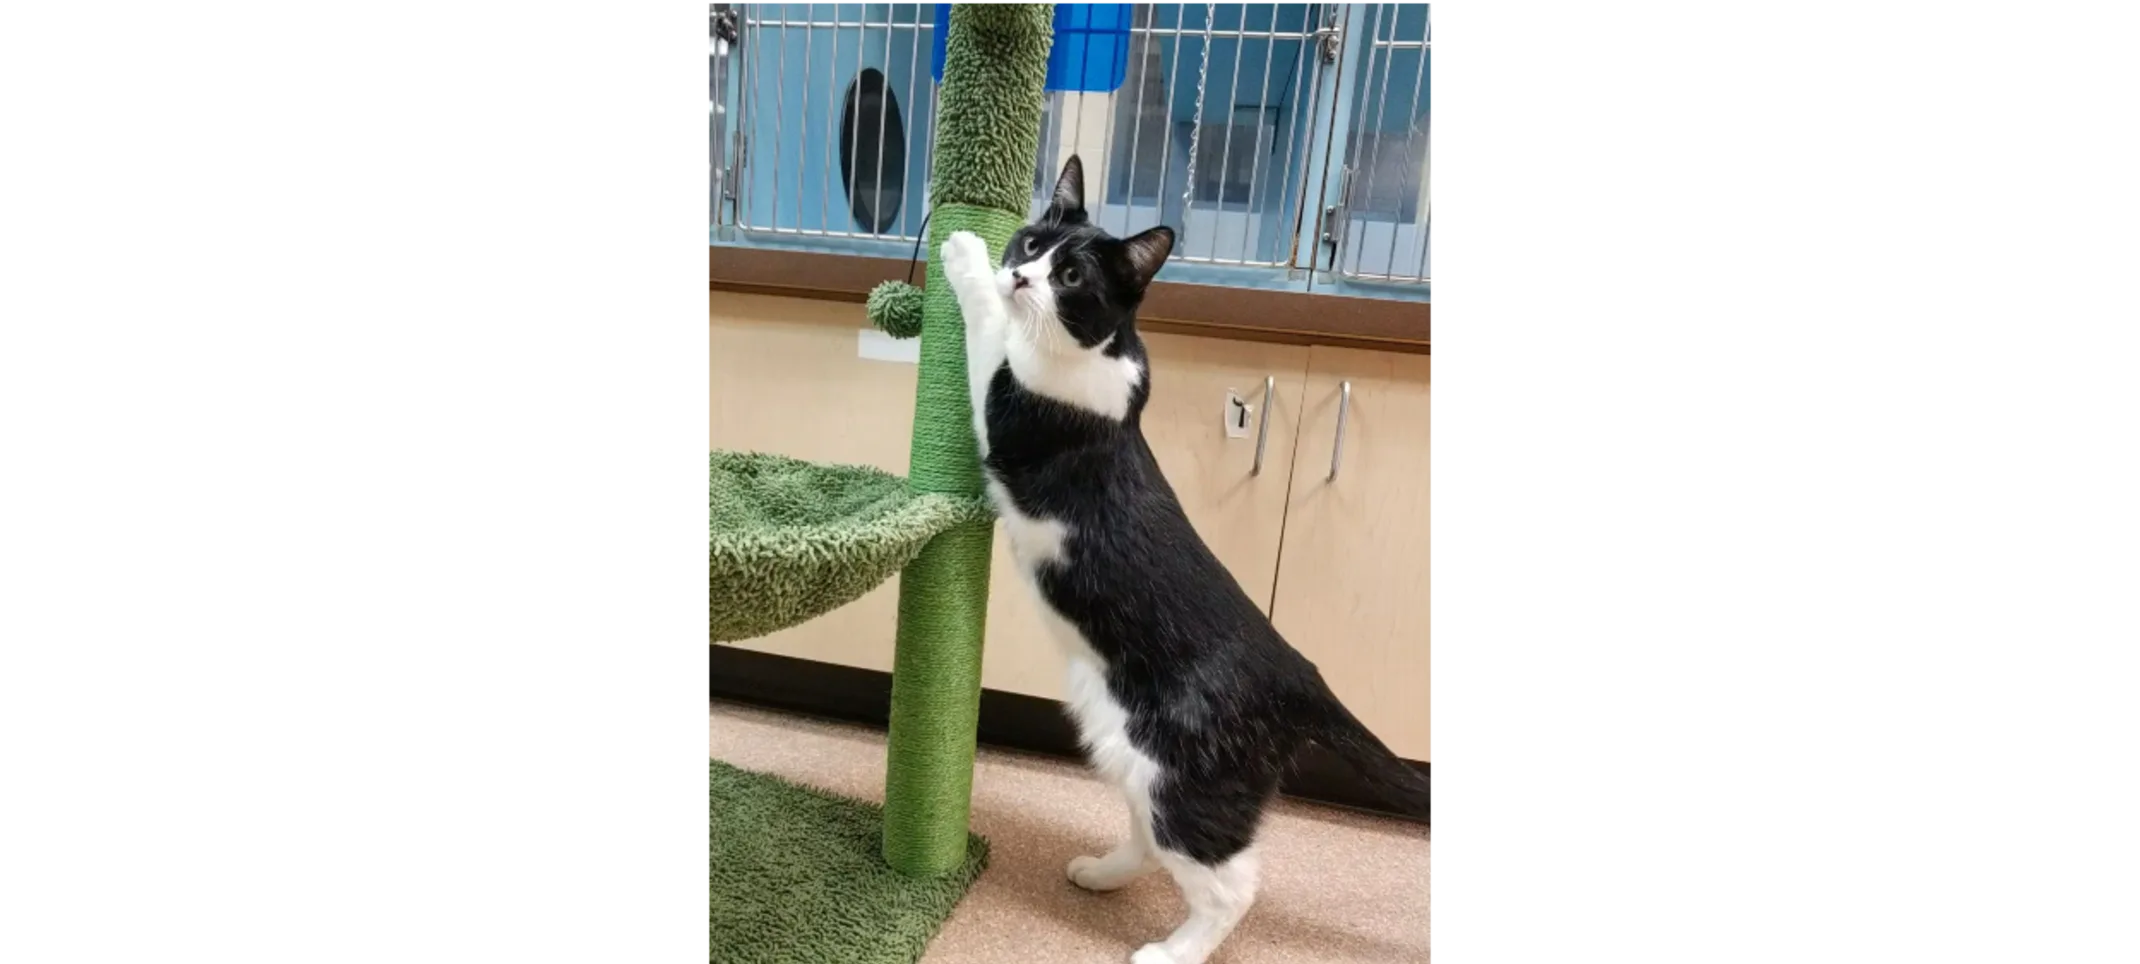 Black/White Cat Playing with a Scratch Pole